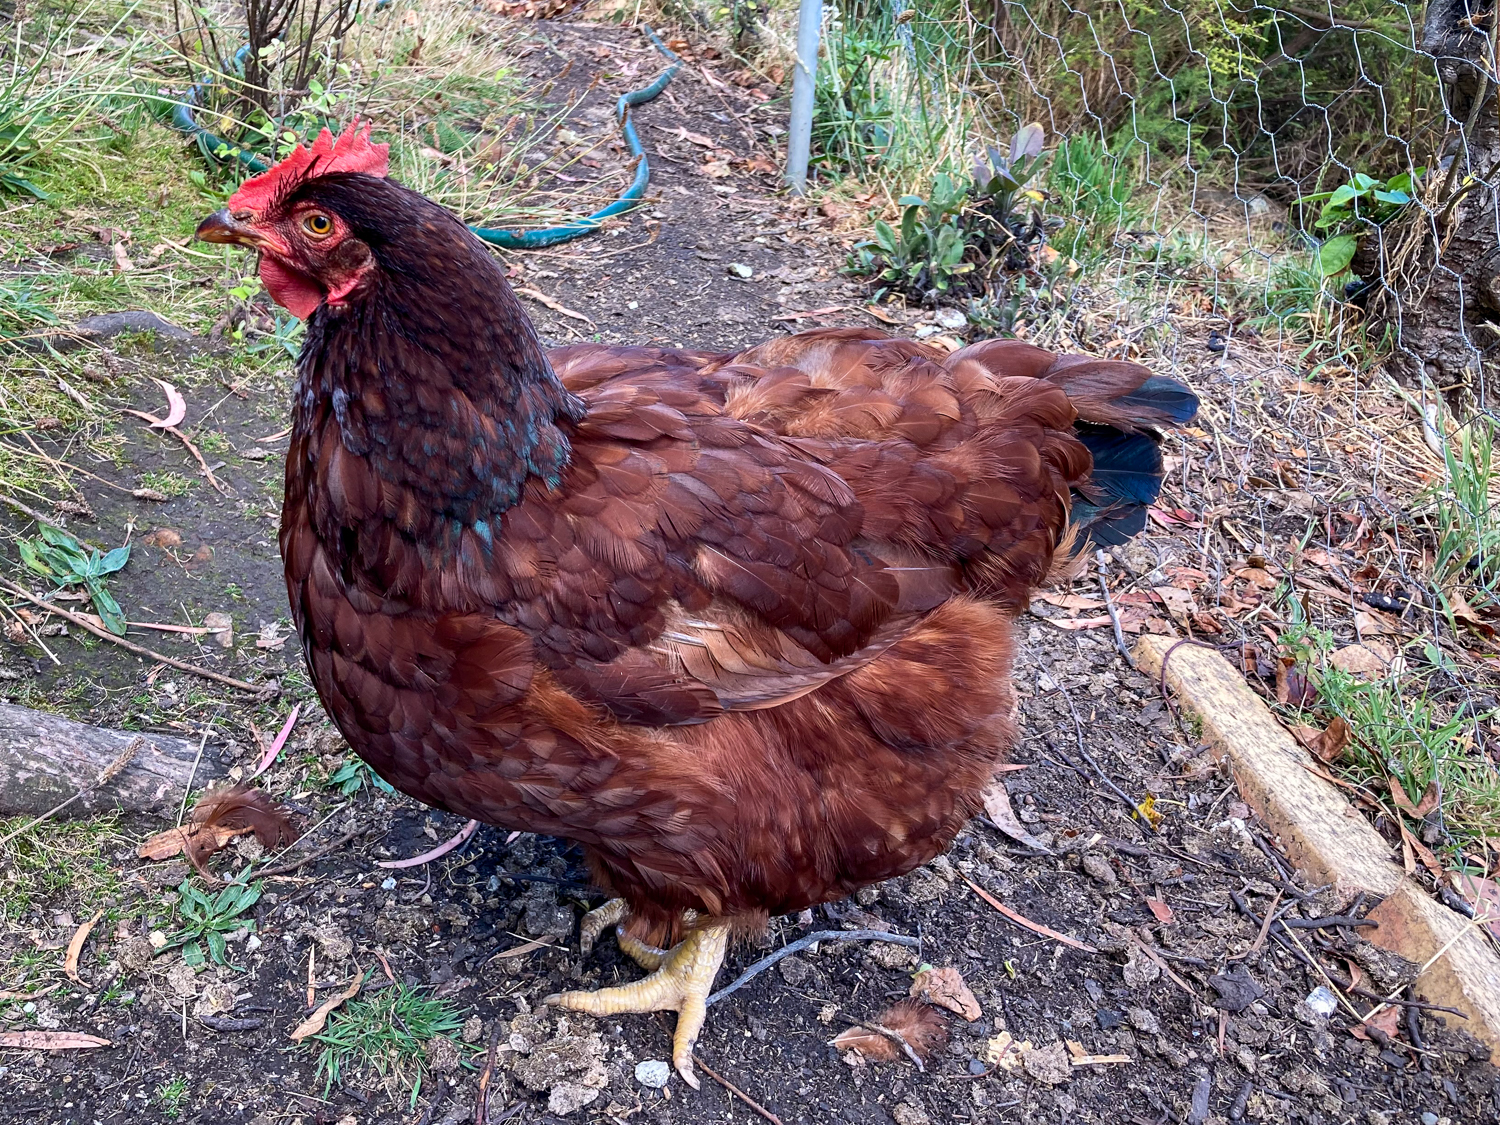 A large Rhode Island Red chicken showing the first signs of moulting